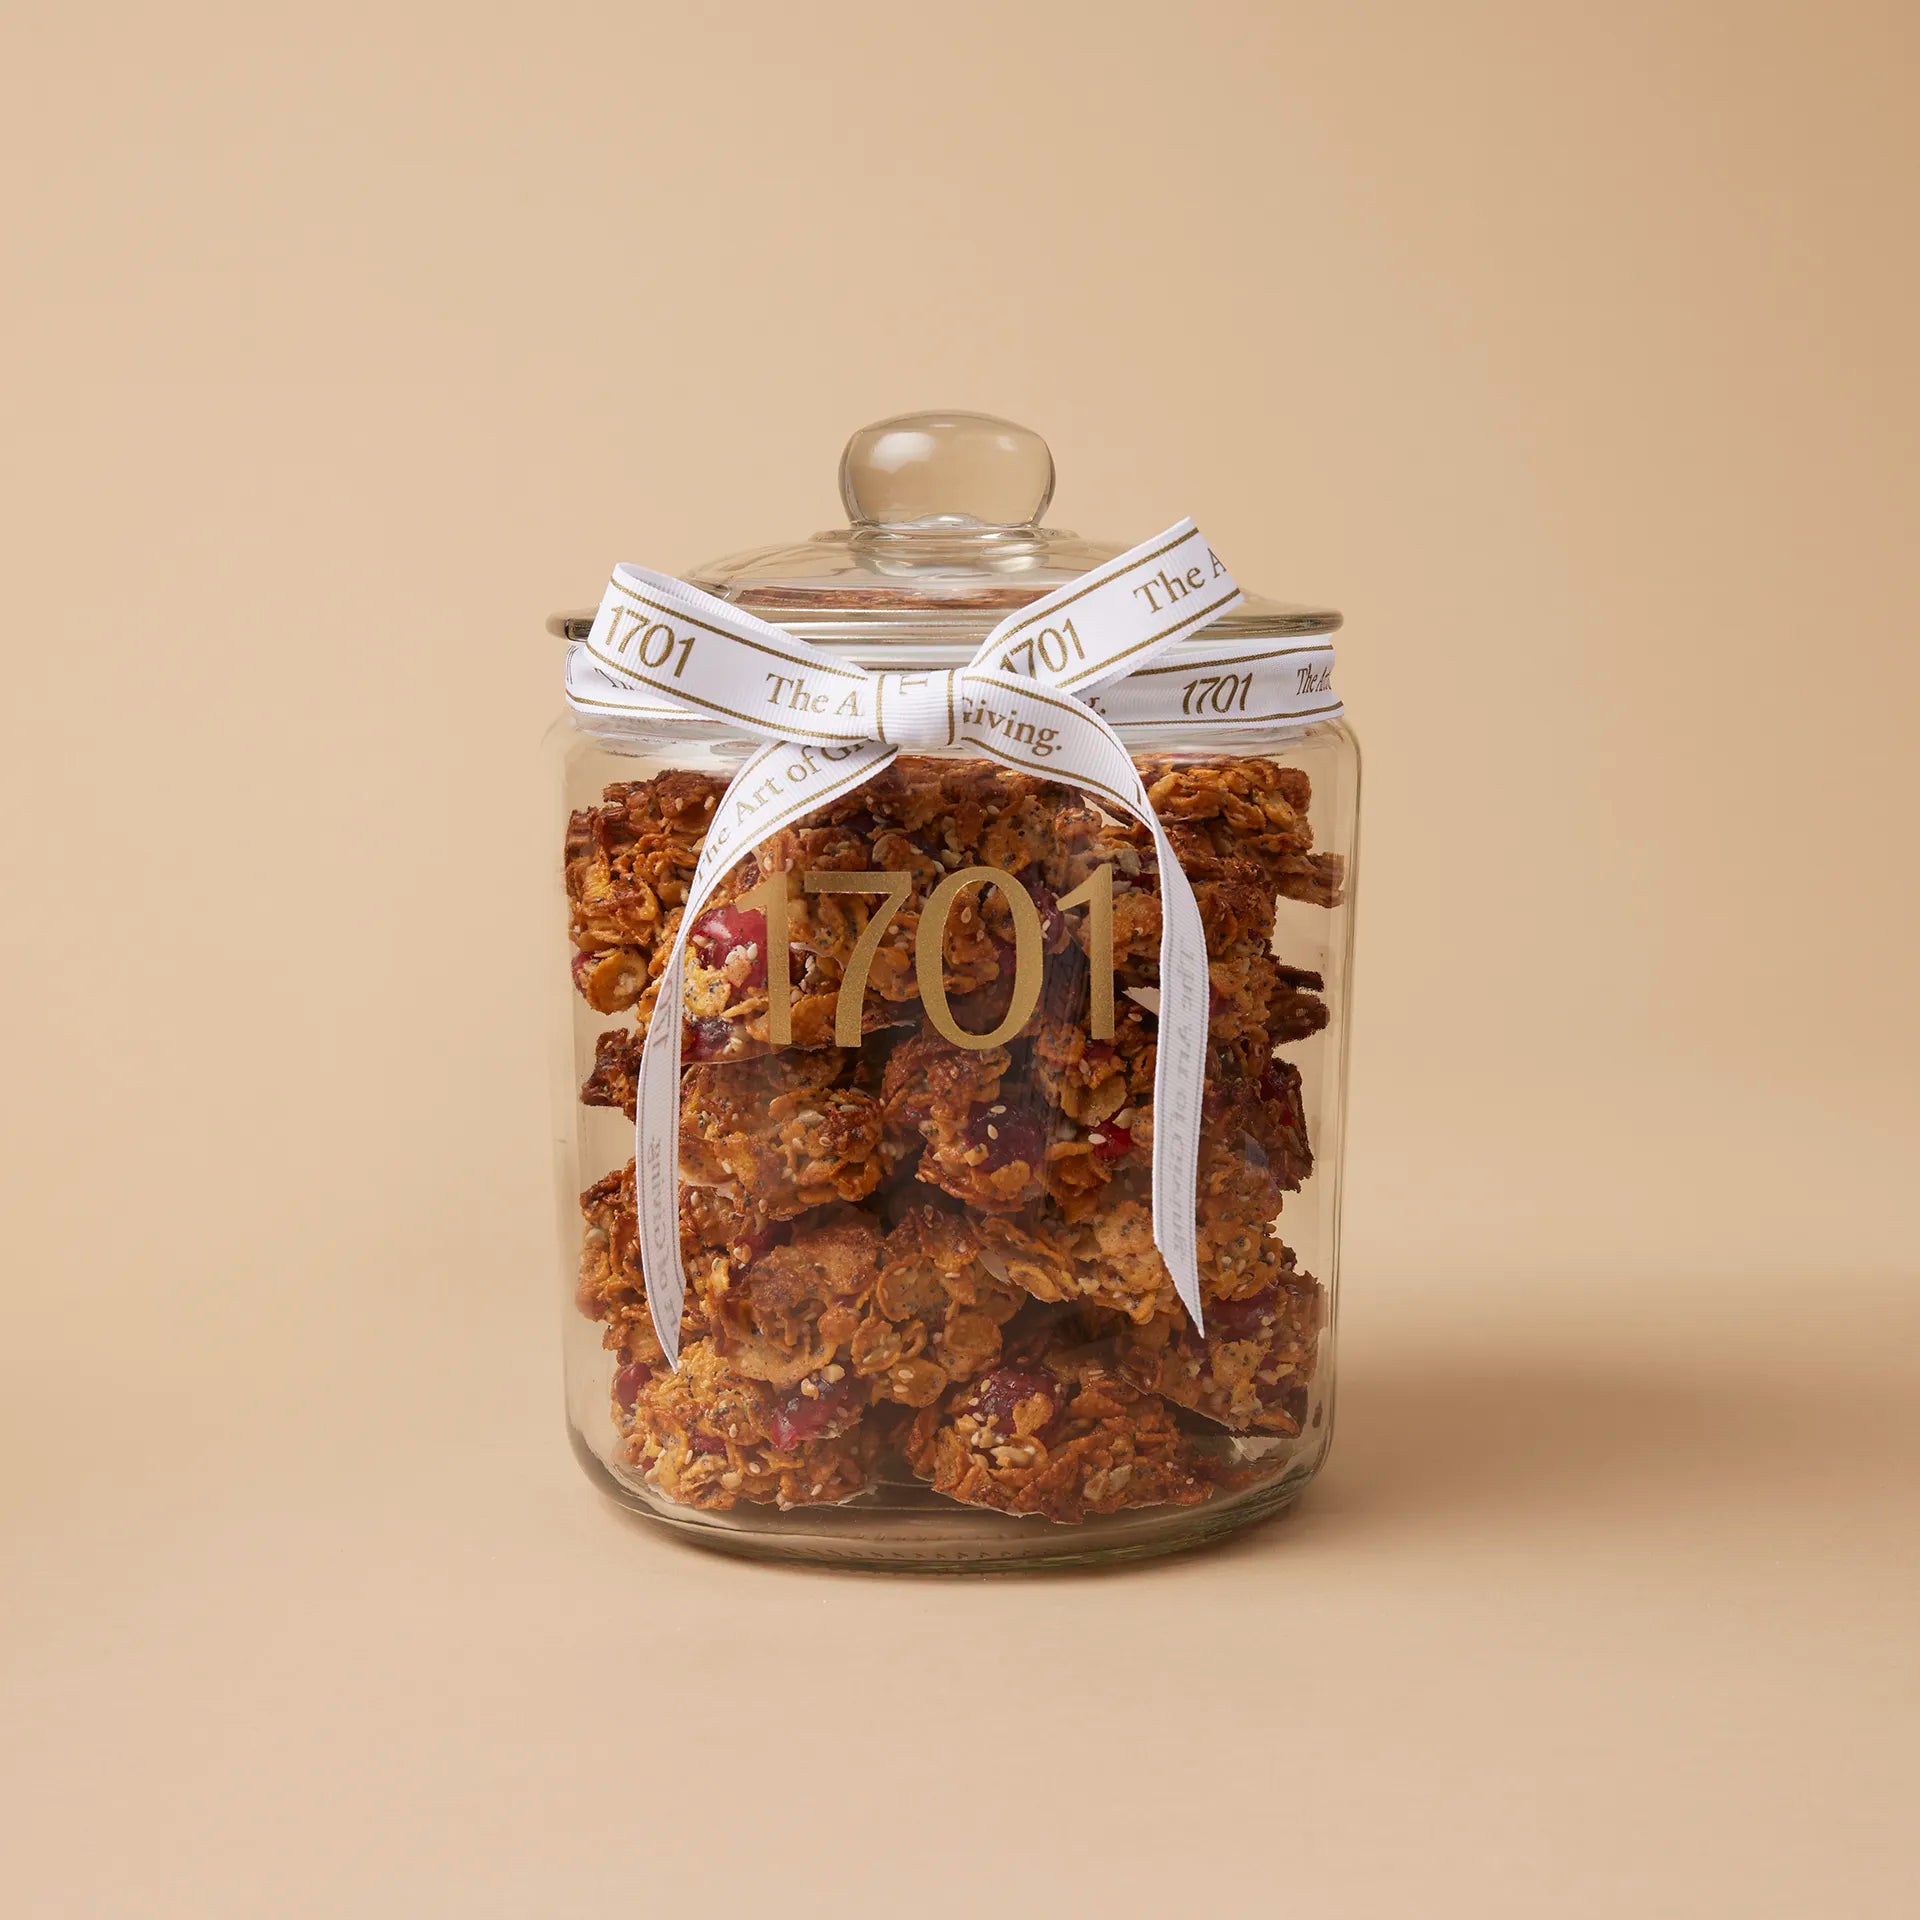 A 1kg glass jar of handmade Crunchy Florentine's biscuits, presented in a glass jar with a hand-tied signature ribbon on a warm background, with the product label visible on the front of the jar. The biscuits are SANHA Halaal approved, making them a perfect gift idea for anyone who appreciates high-quality biscuits made with care.